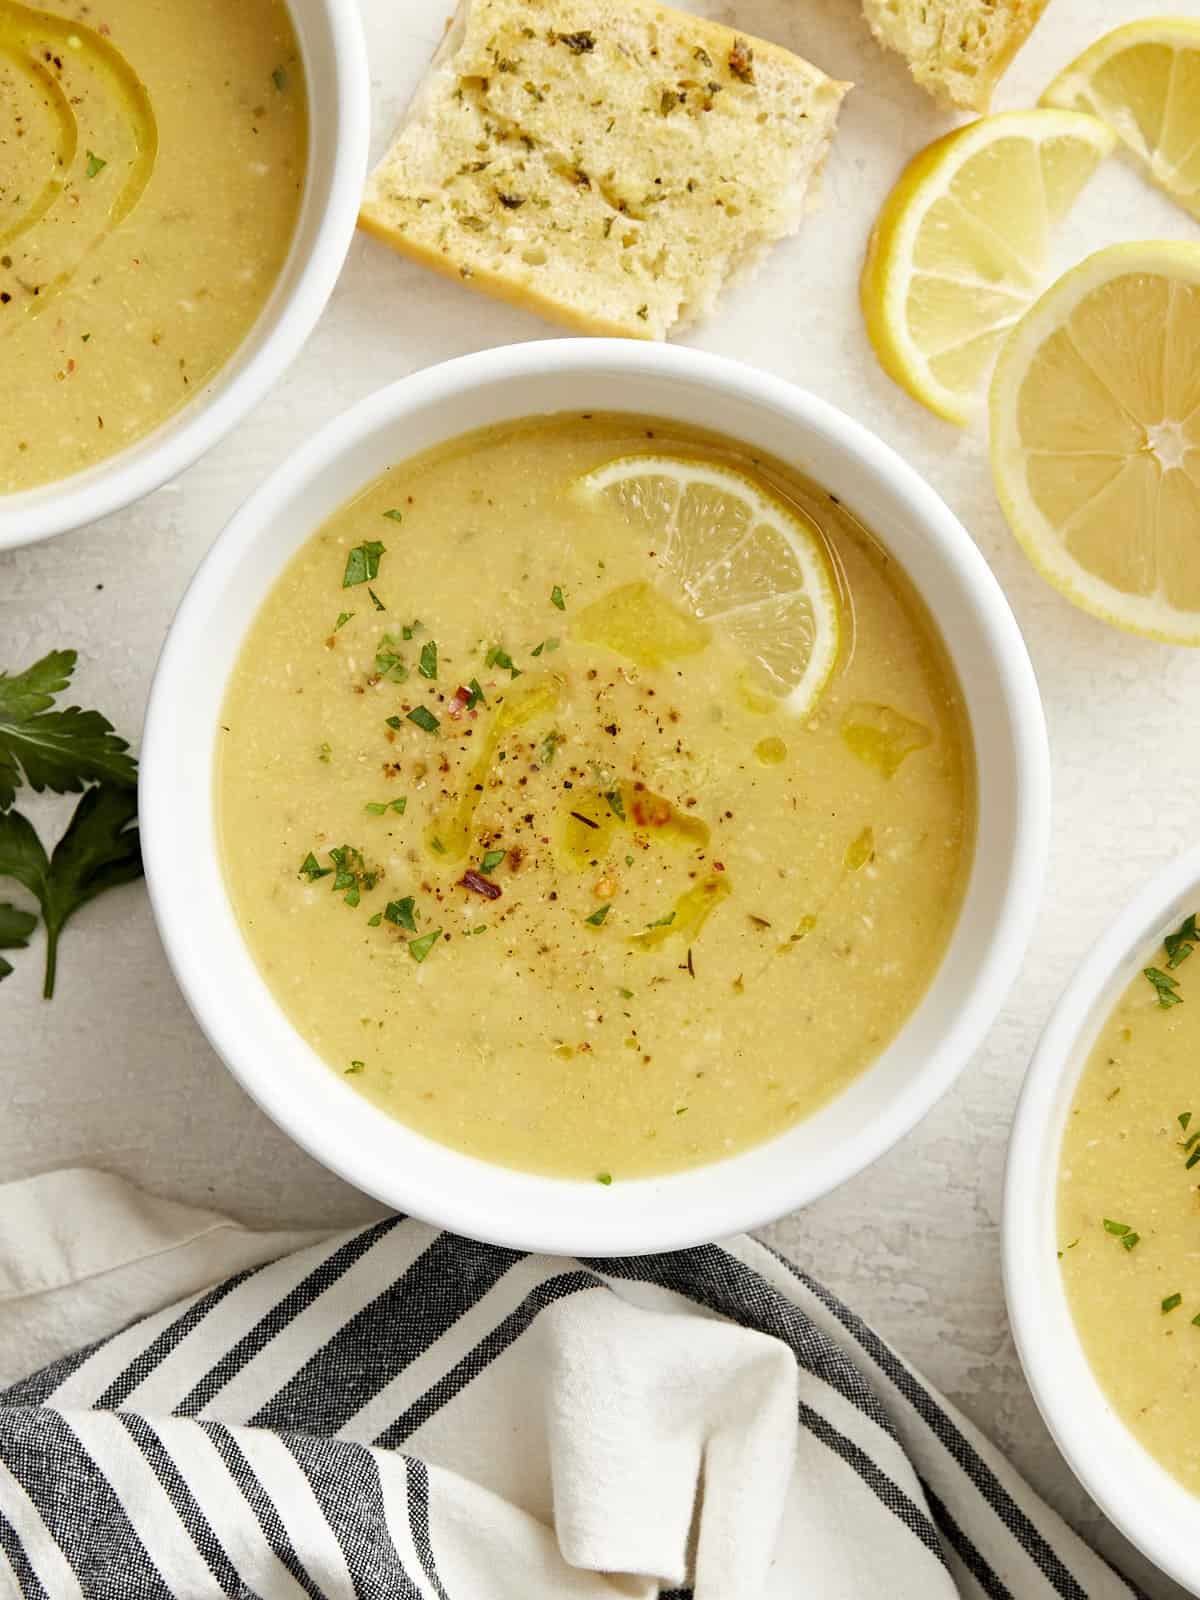 Overhead view of three bowls of lemony chickpea soup garnished with a lemon slice.